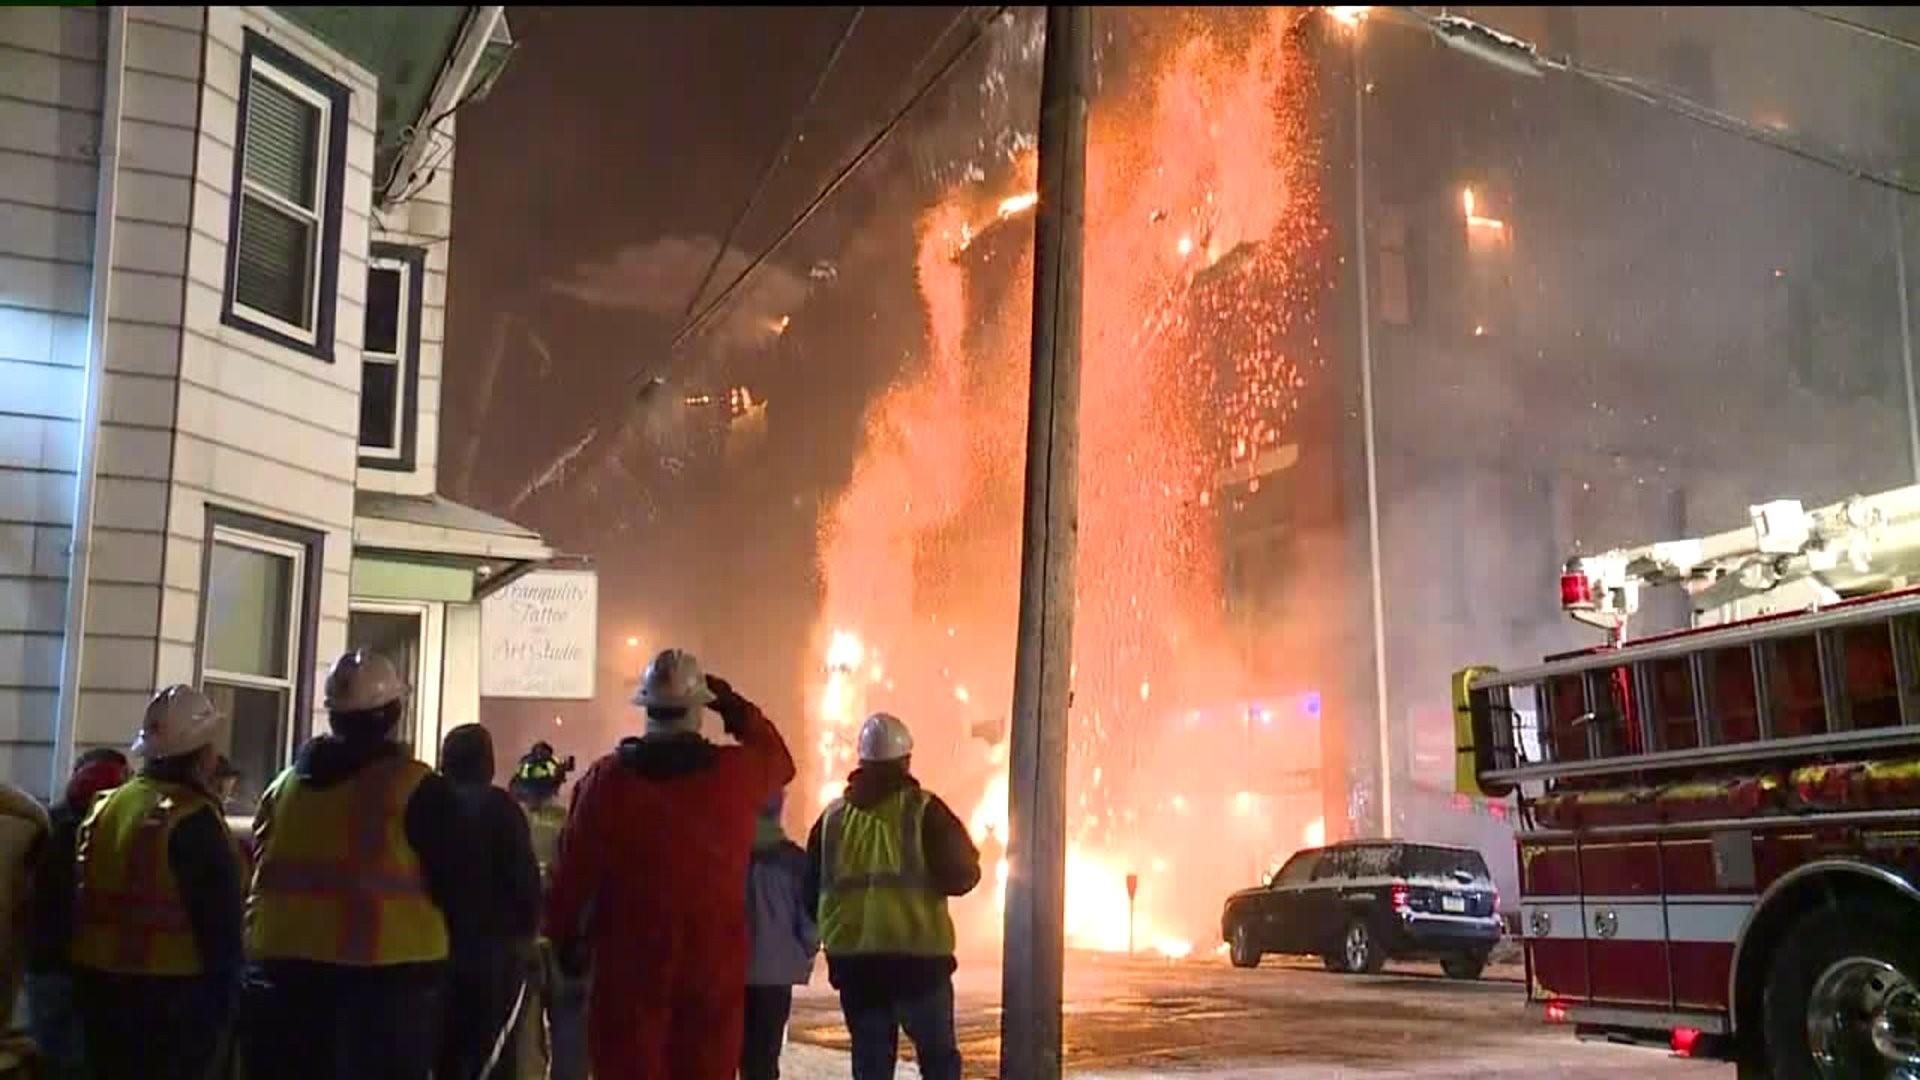 Building Gutted, Roof Collapses During Fire in Shamokin